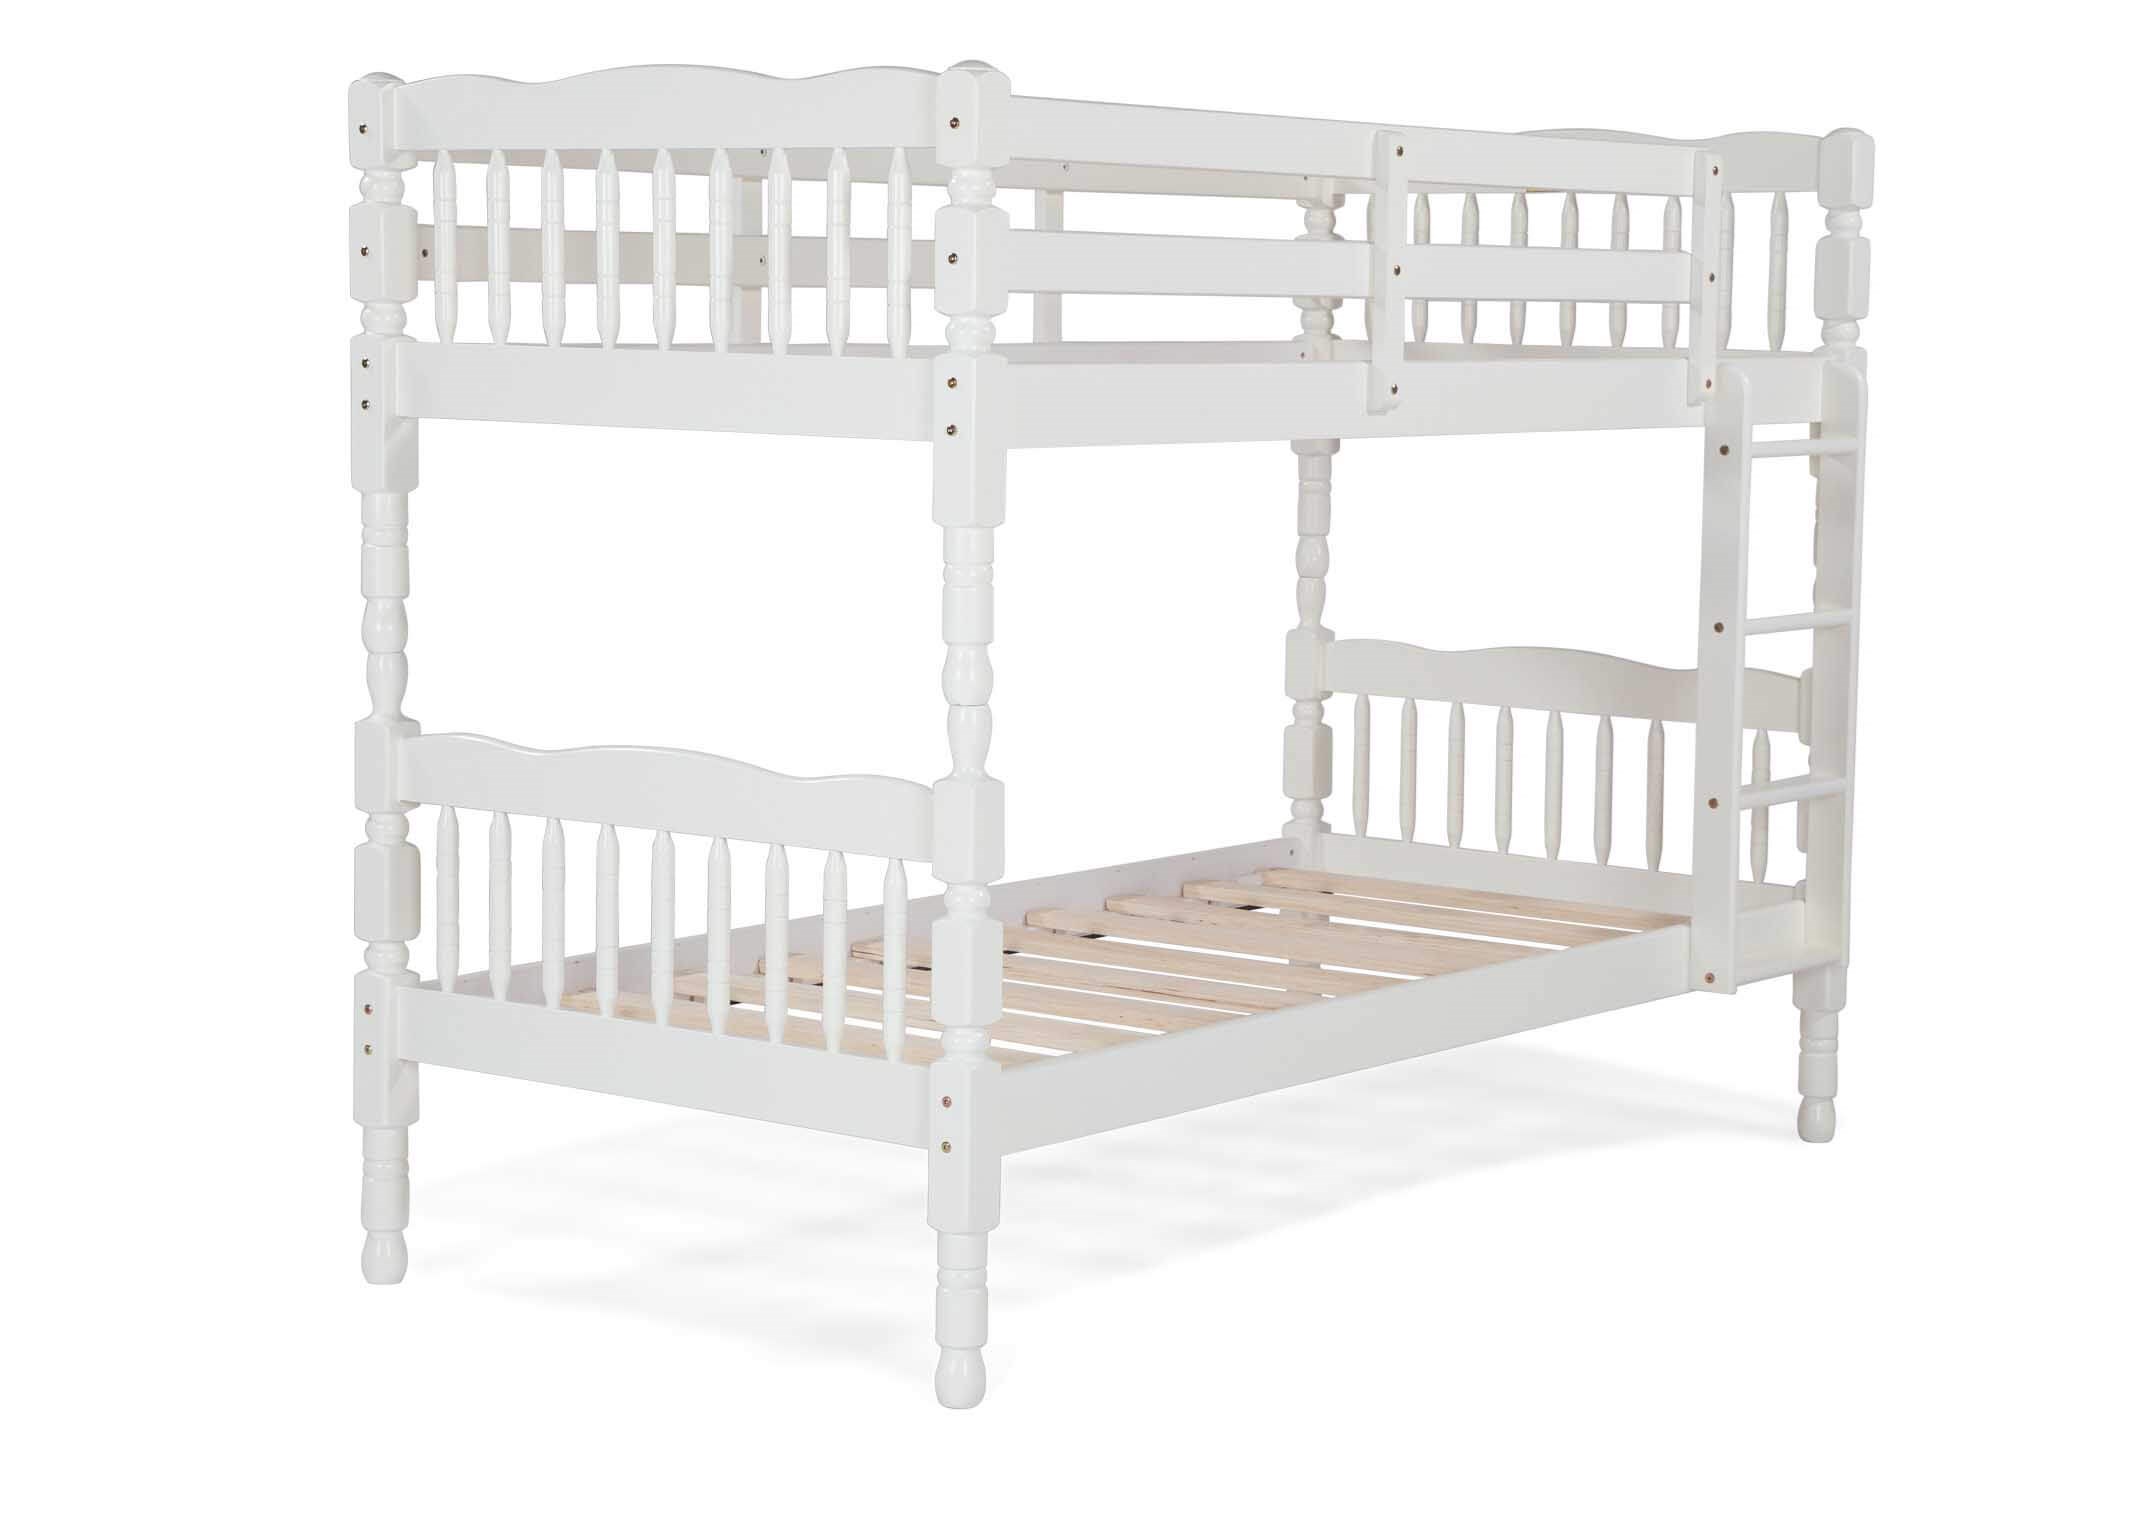 3 Ft White Painted Bunk Bed Austin, Can You Paint Pine Bunk Beds